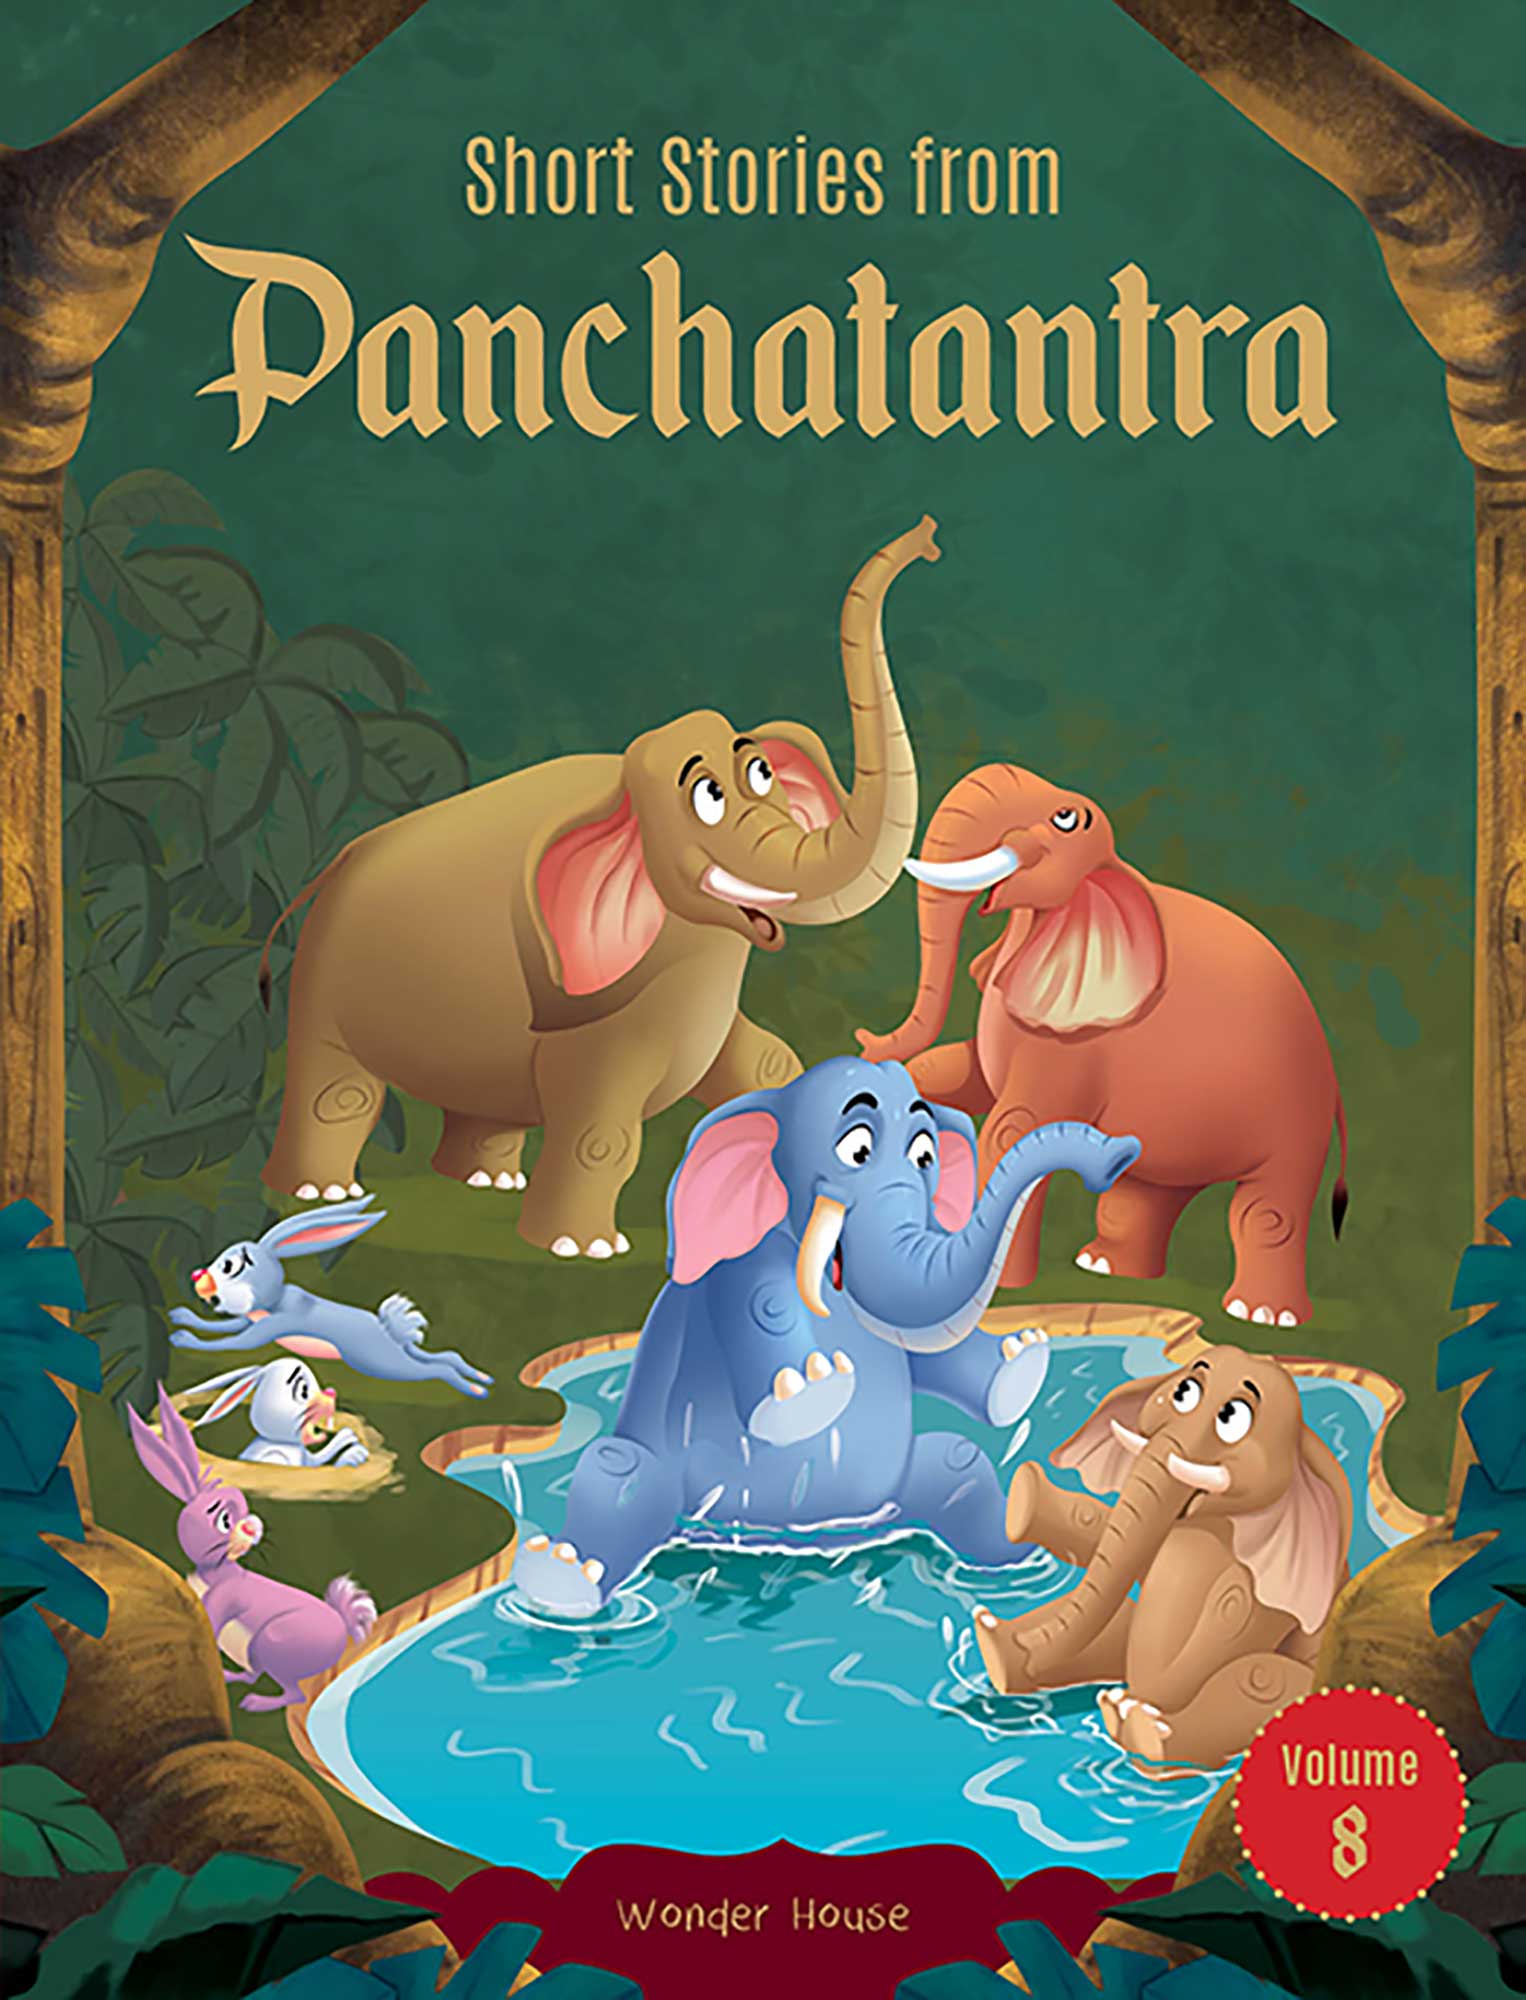 Short Stories From Panchatantra - Volume 8: Abridged Illustrated Stories For Children (With Morals)